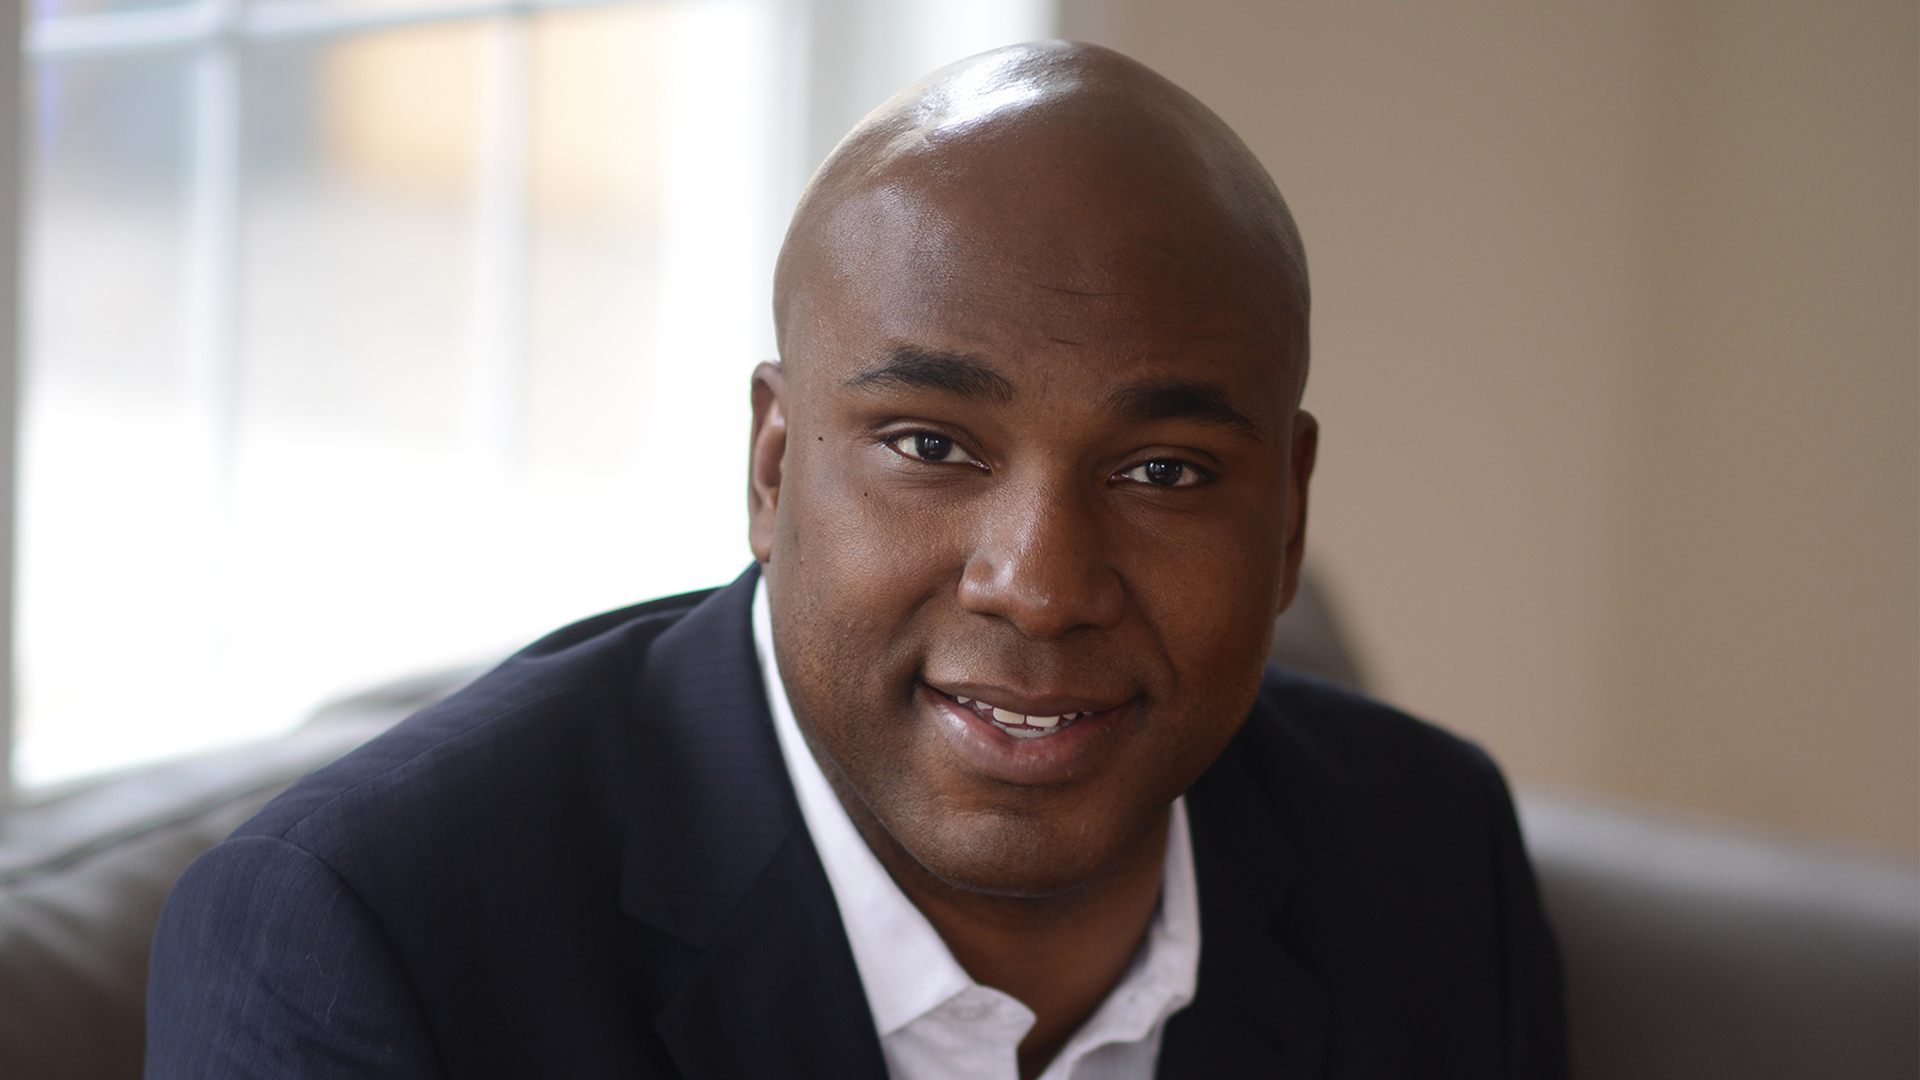 Founder Keith Leaphart Launched A Philanthropic Platform To Empower Everyday Givers